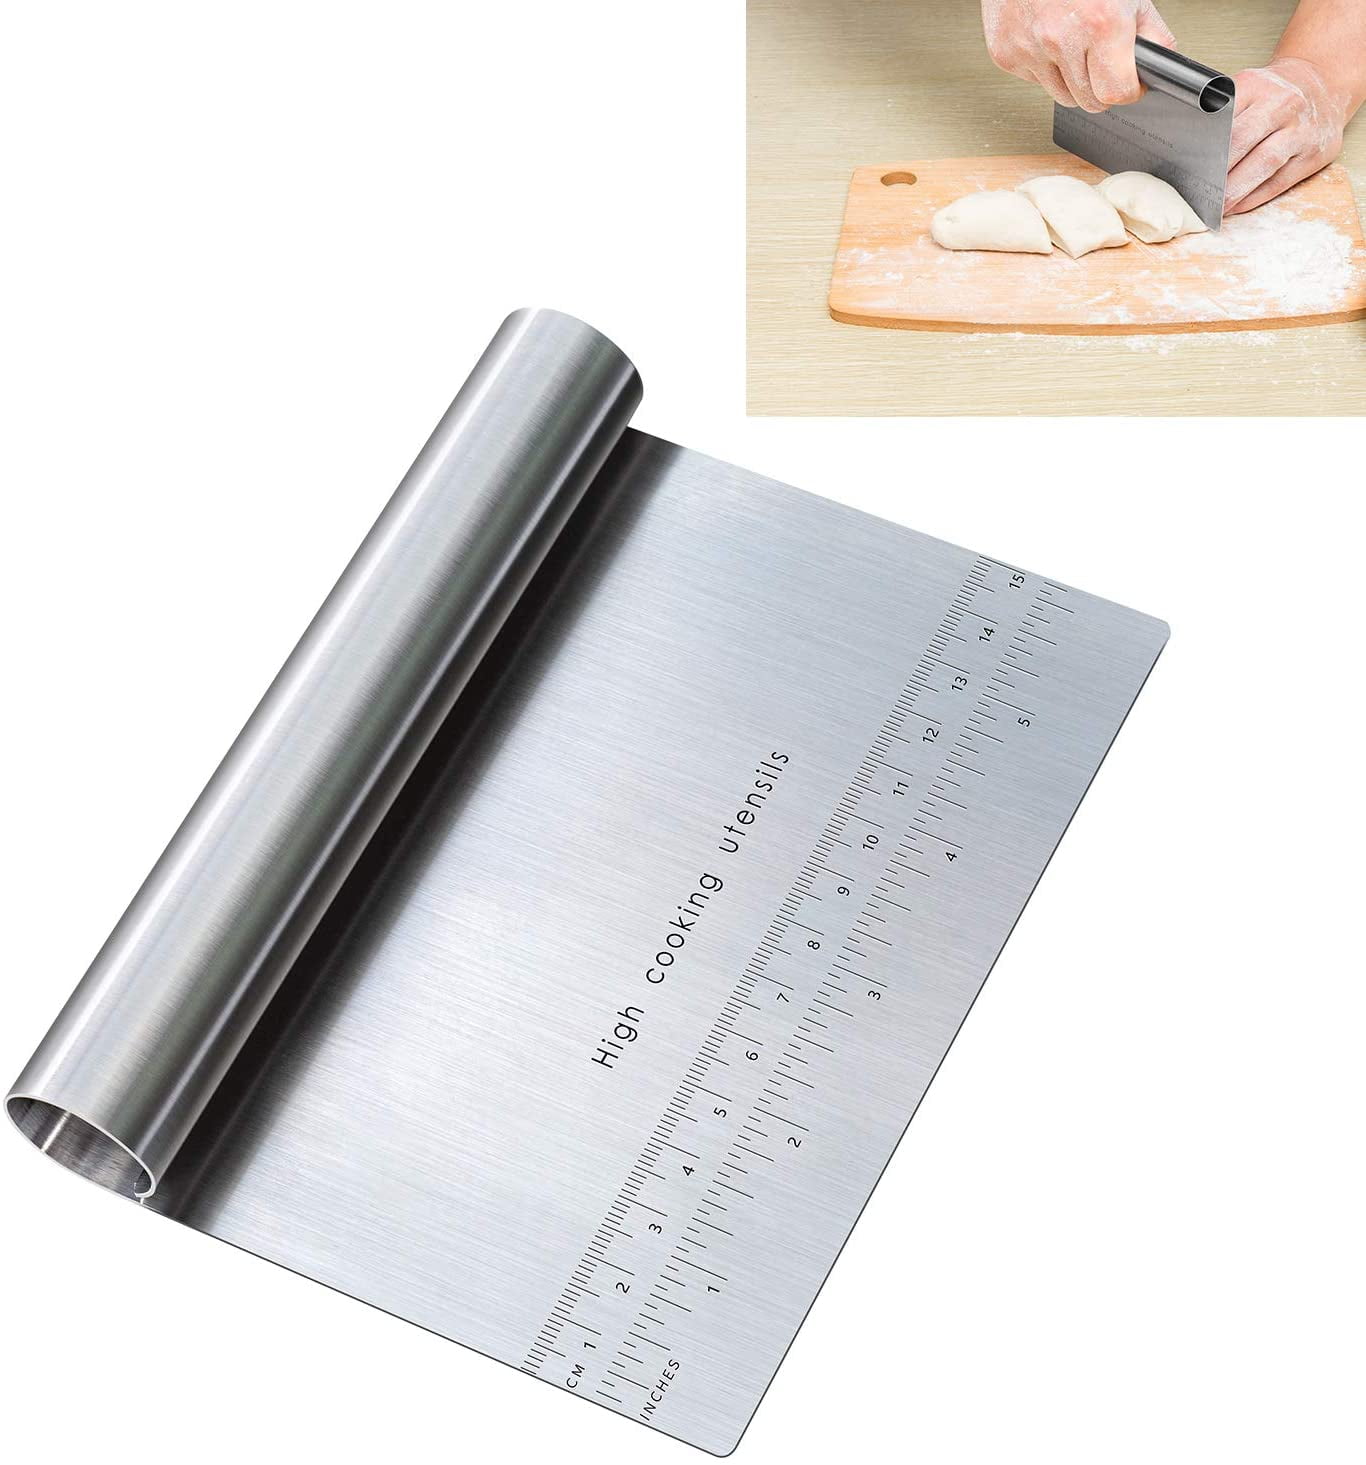 LavoHome Stainless Steel Bench Scraper & Dough Cutter - Multi Function Kitchen Tool Scoop Scraper Best Pizza and Dough Cutter with Ruler Measurements